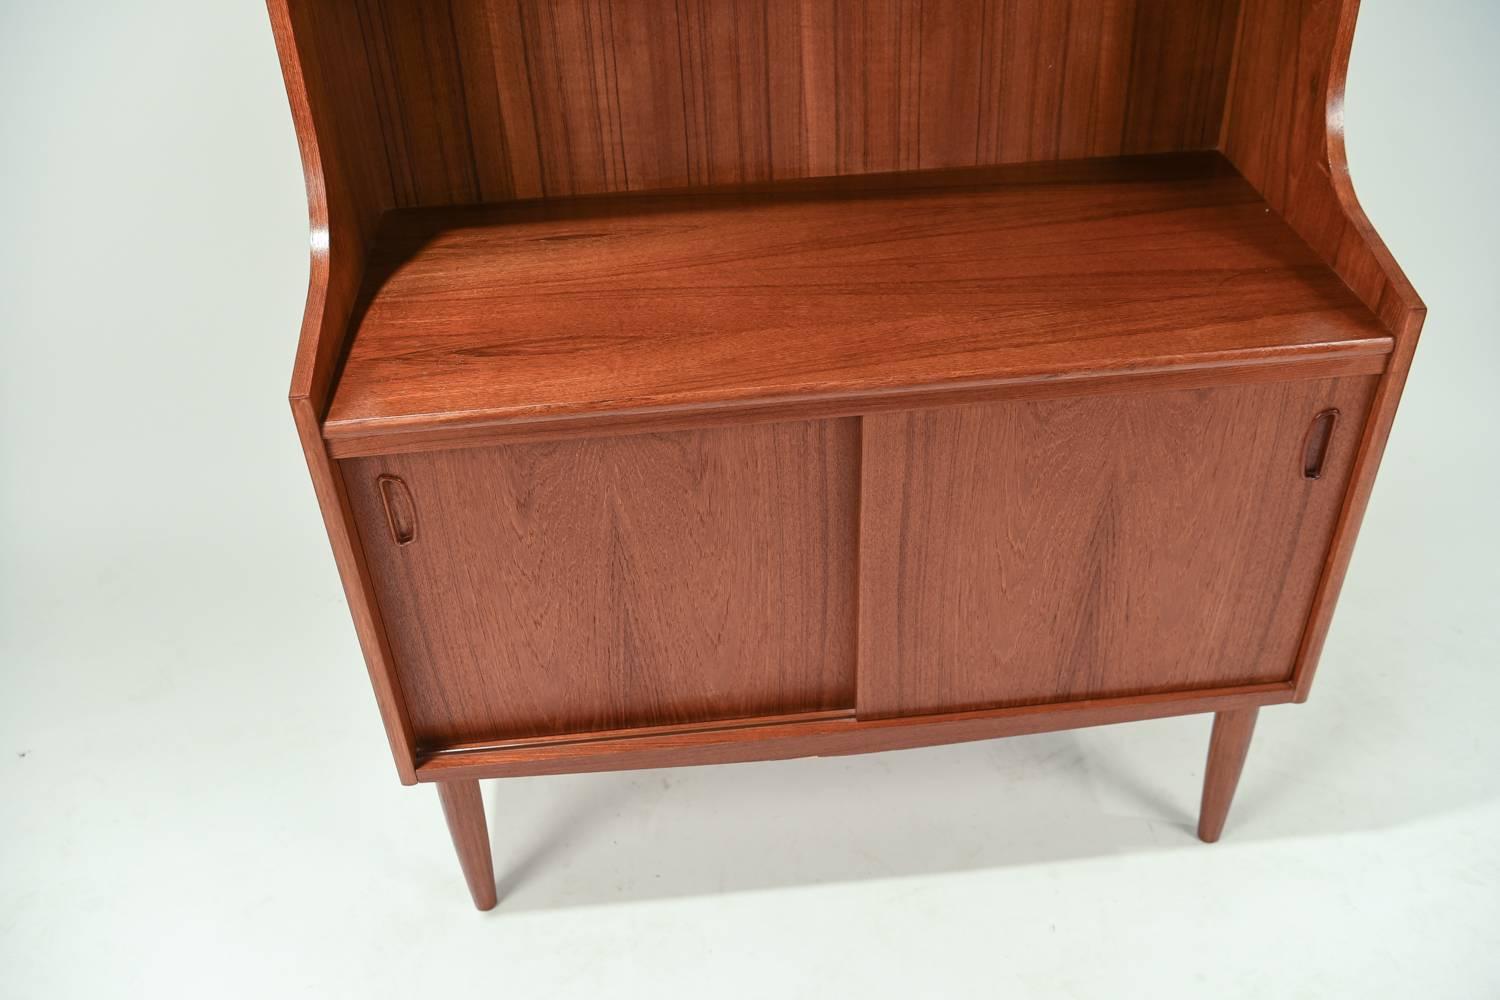 This Danish midcentury bookcase in the manner of Johannes Sorth for Nexø is made of handsome teak wood and features multiple shelves and a compartment below with wonderful recessed handles for storage. Great display piece.